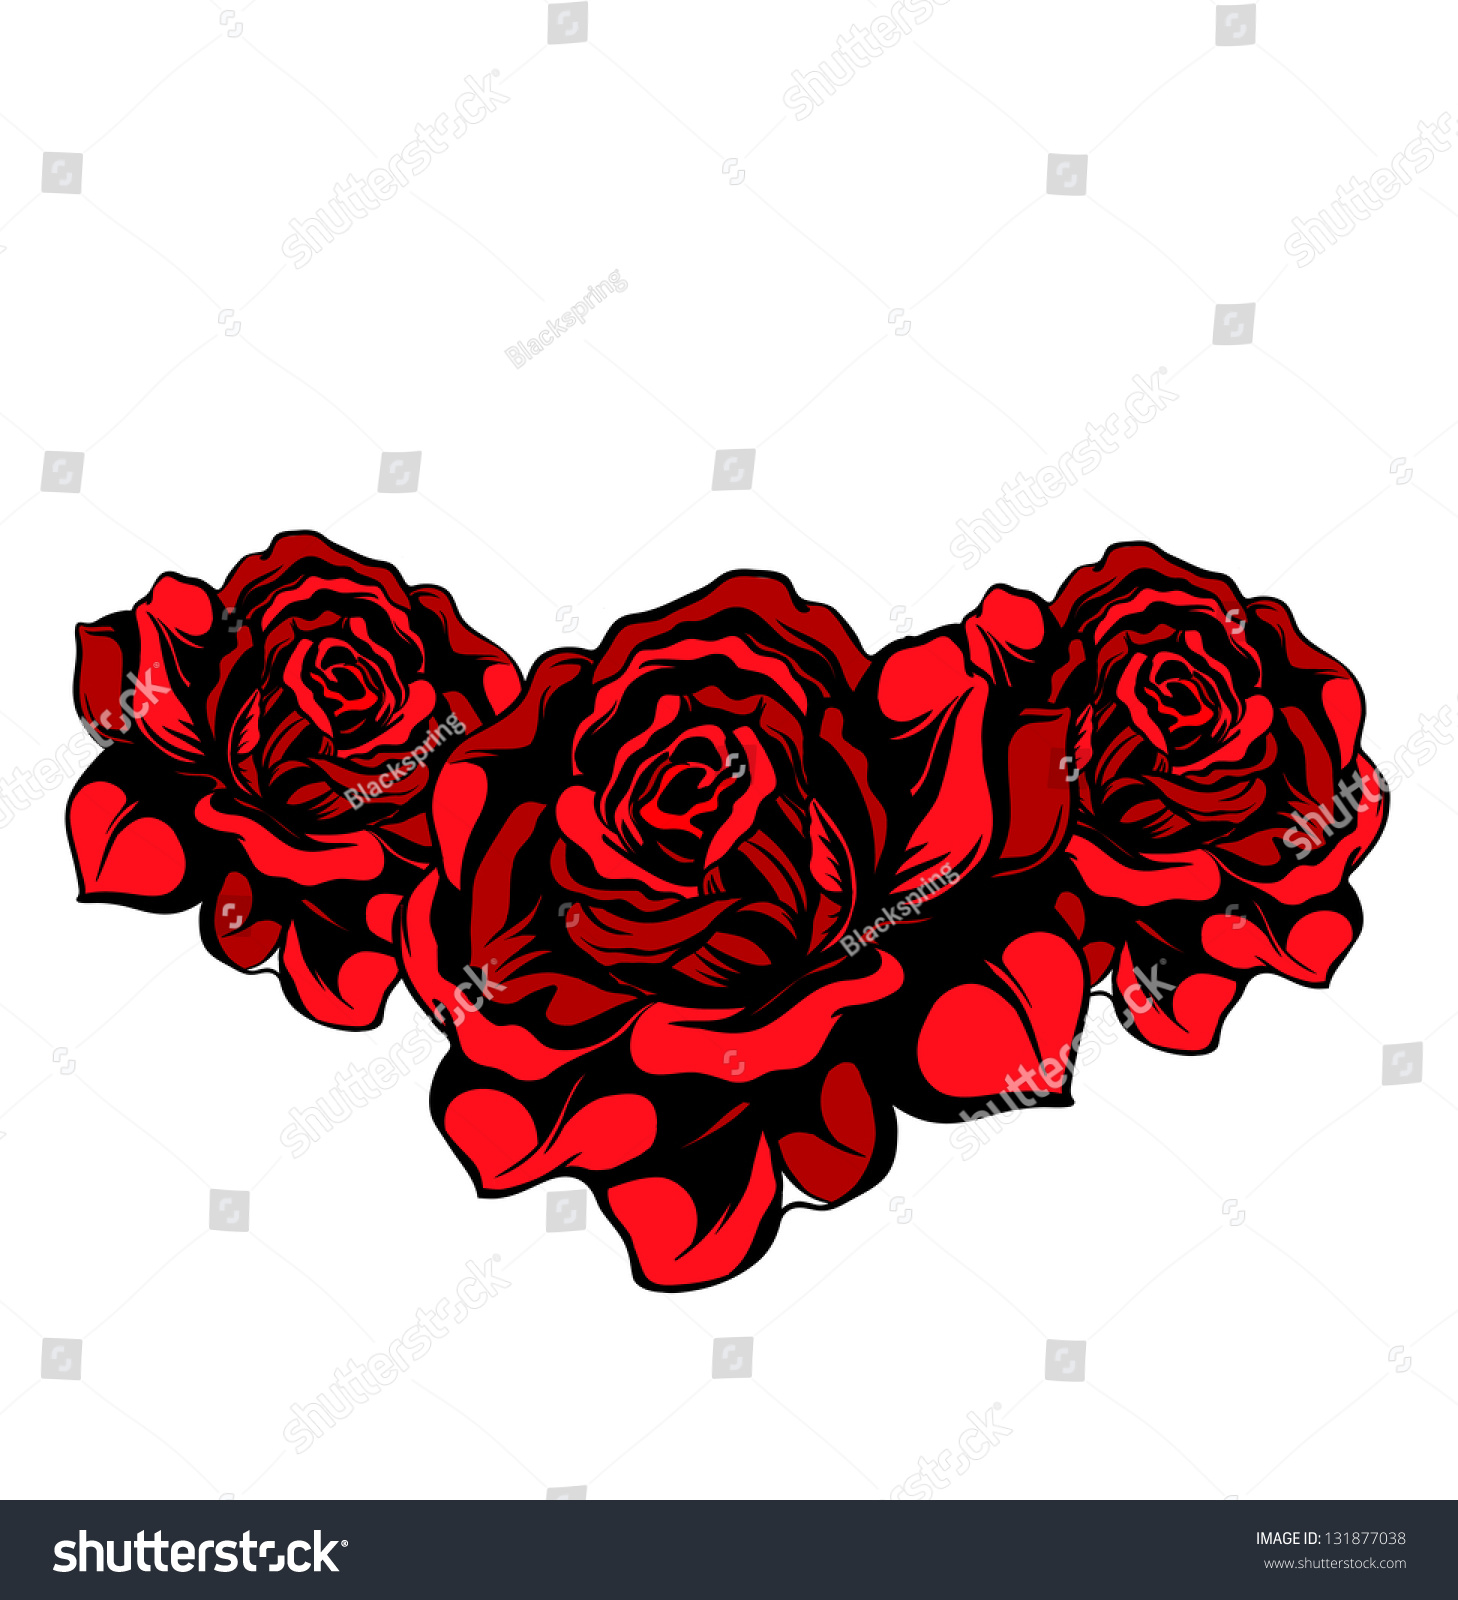 34,920 Gothic roses Images, Stock Photos & Vectors | Shutterstock